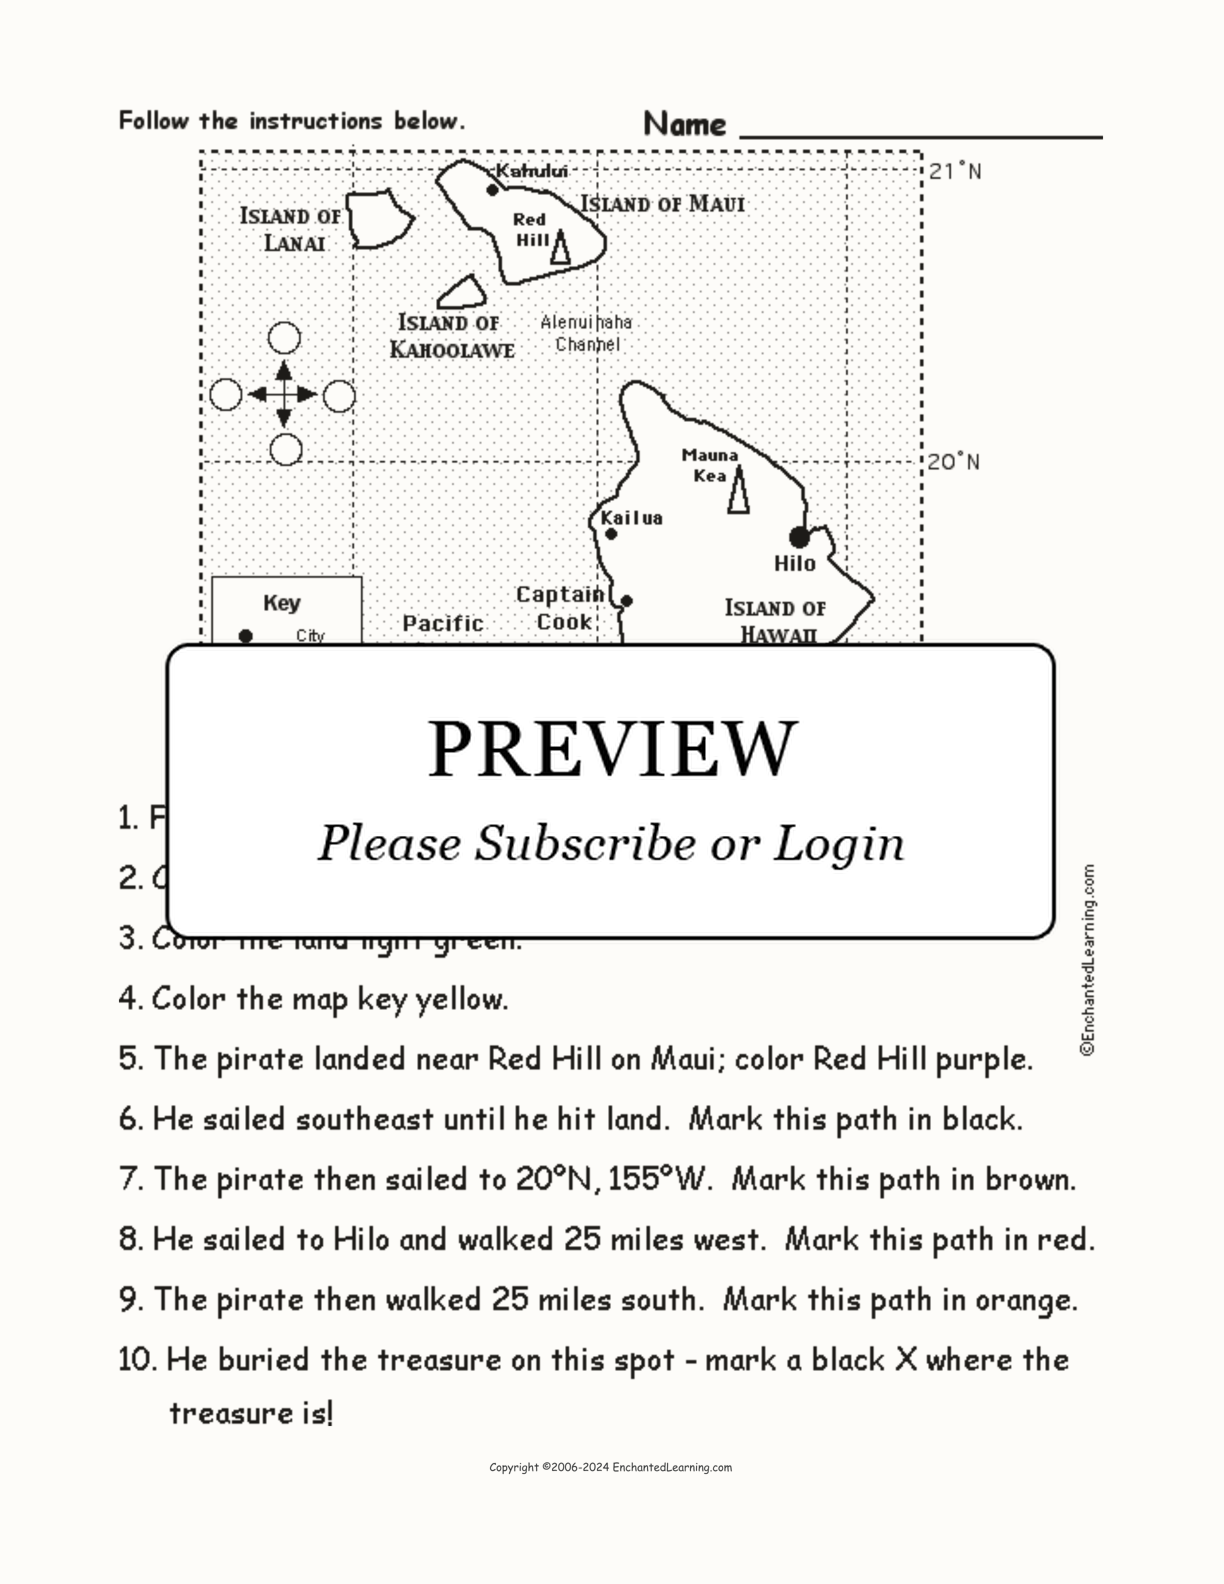 Pirate Map - Follow the Instructions interactive worksheet page 1